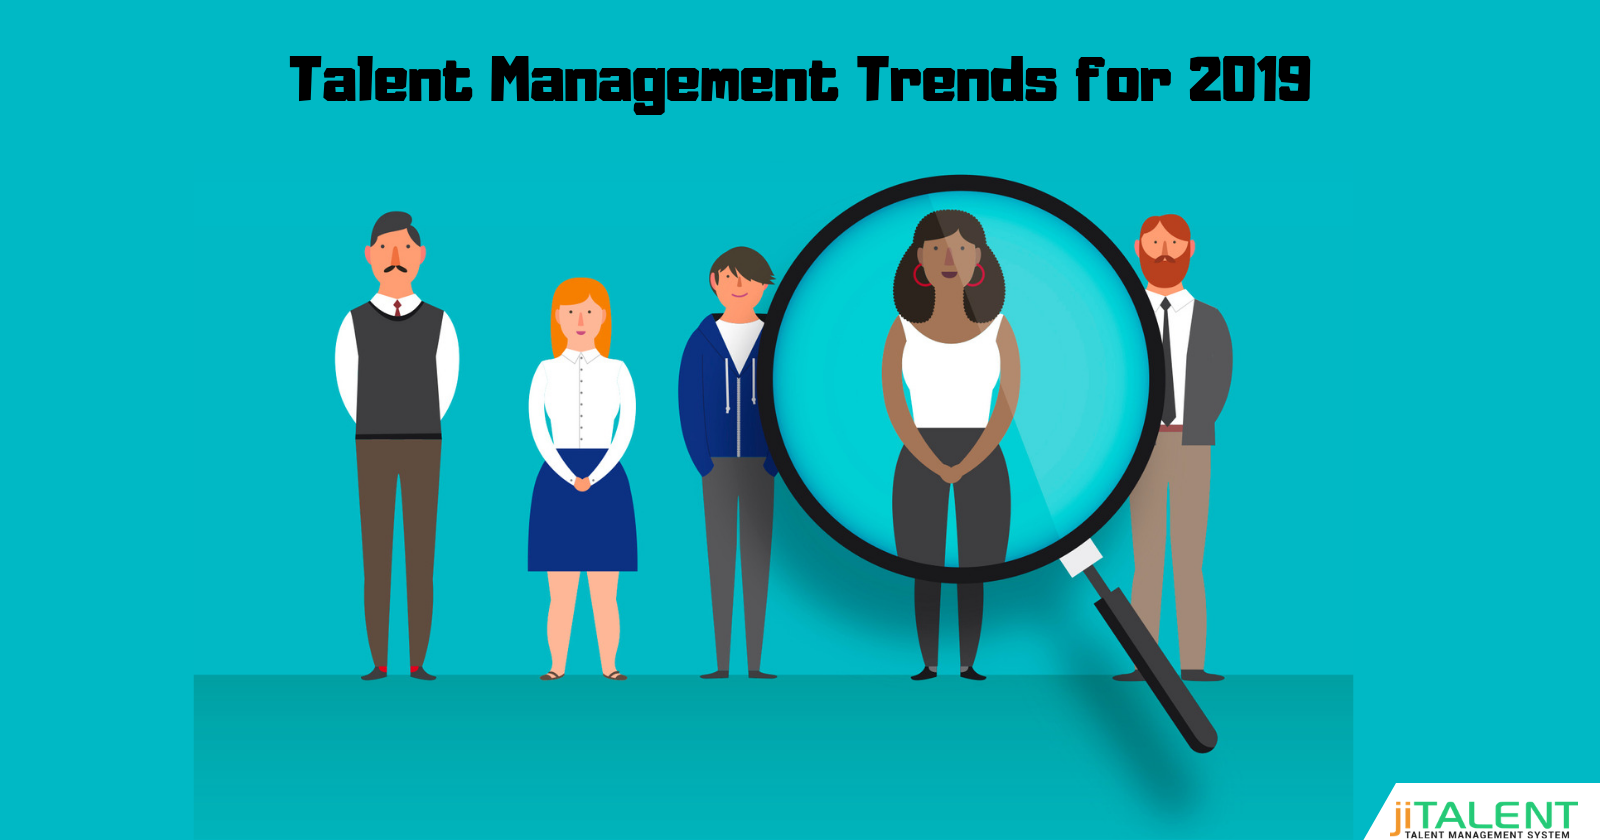 Top Talent Management Strategies For Employers in 2019